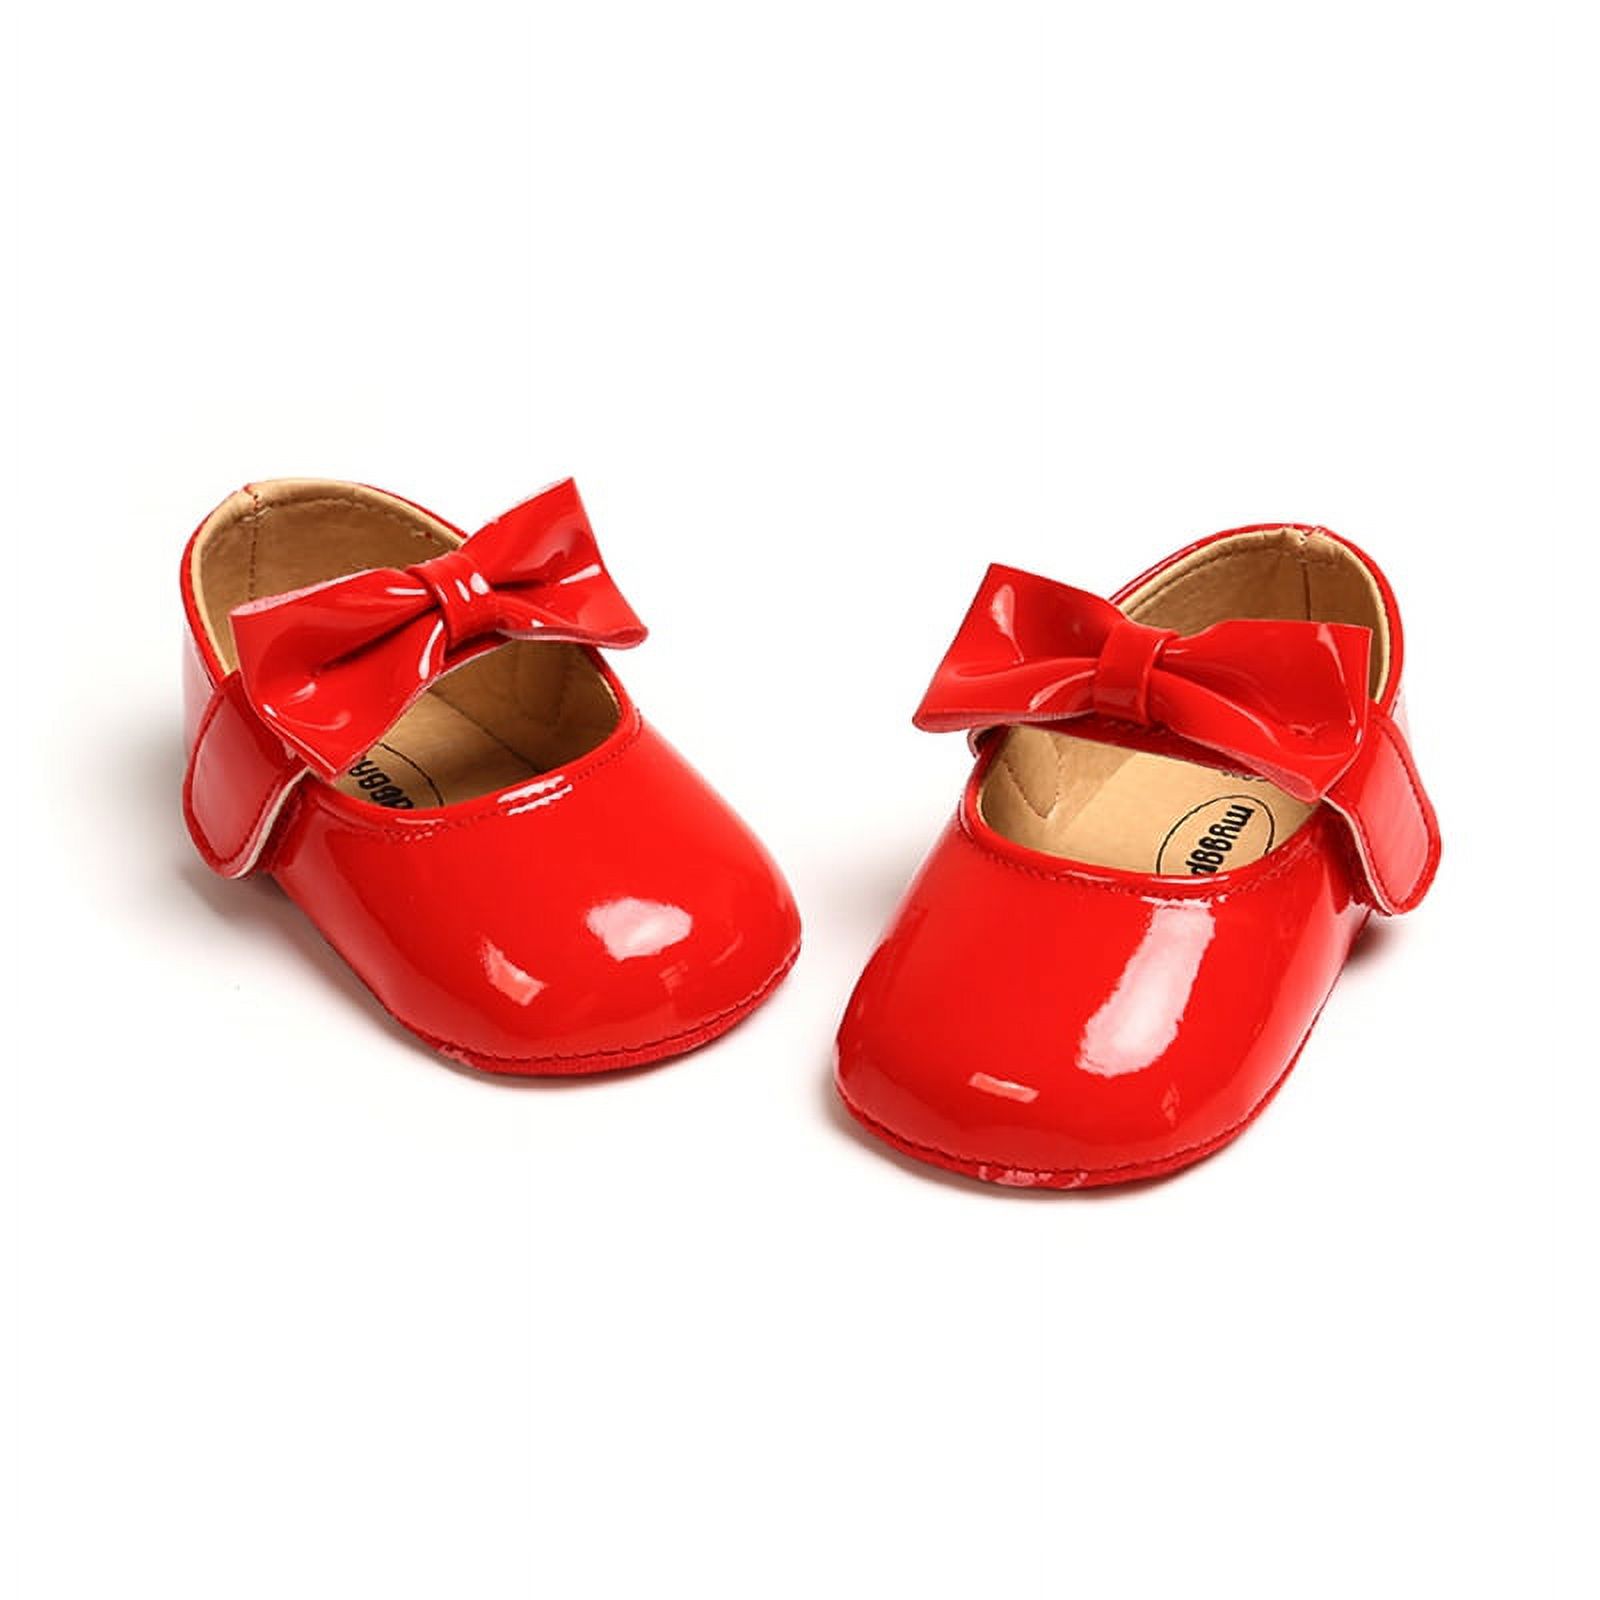 Maxcozy Infant Toddler Baby Girl's Soft Sole Anti-Slip Casual Shoes PU Leather Bowknot Princess Shoes - image 3 of 8